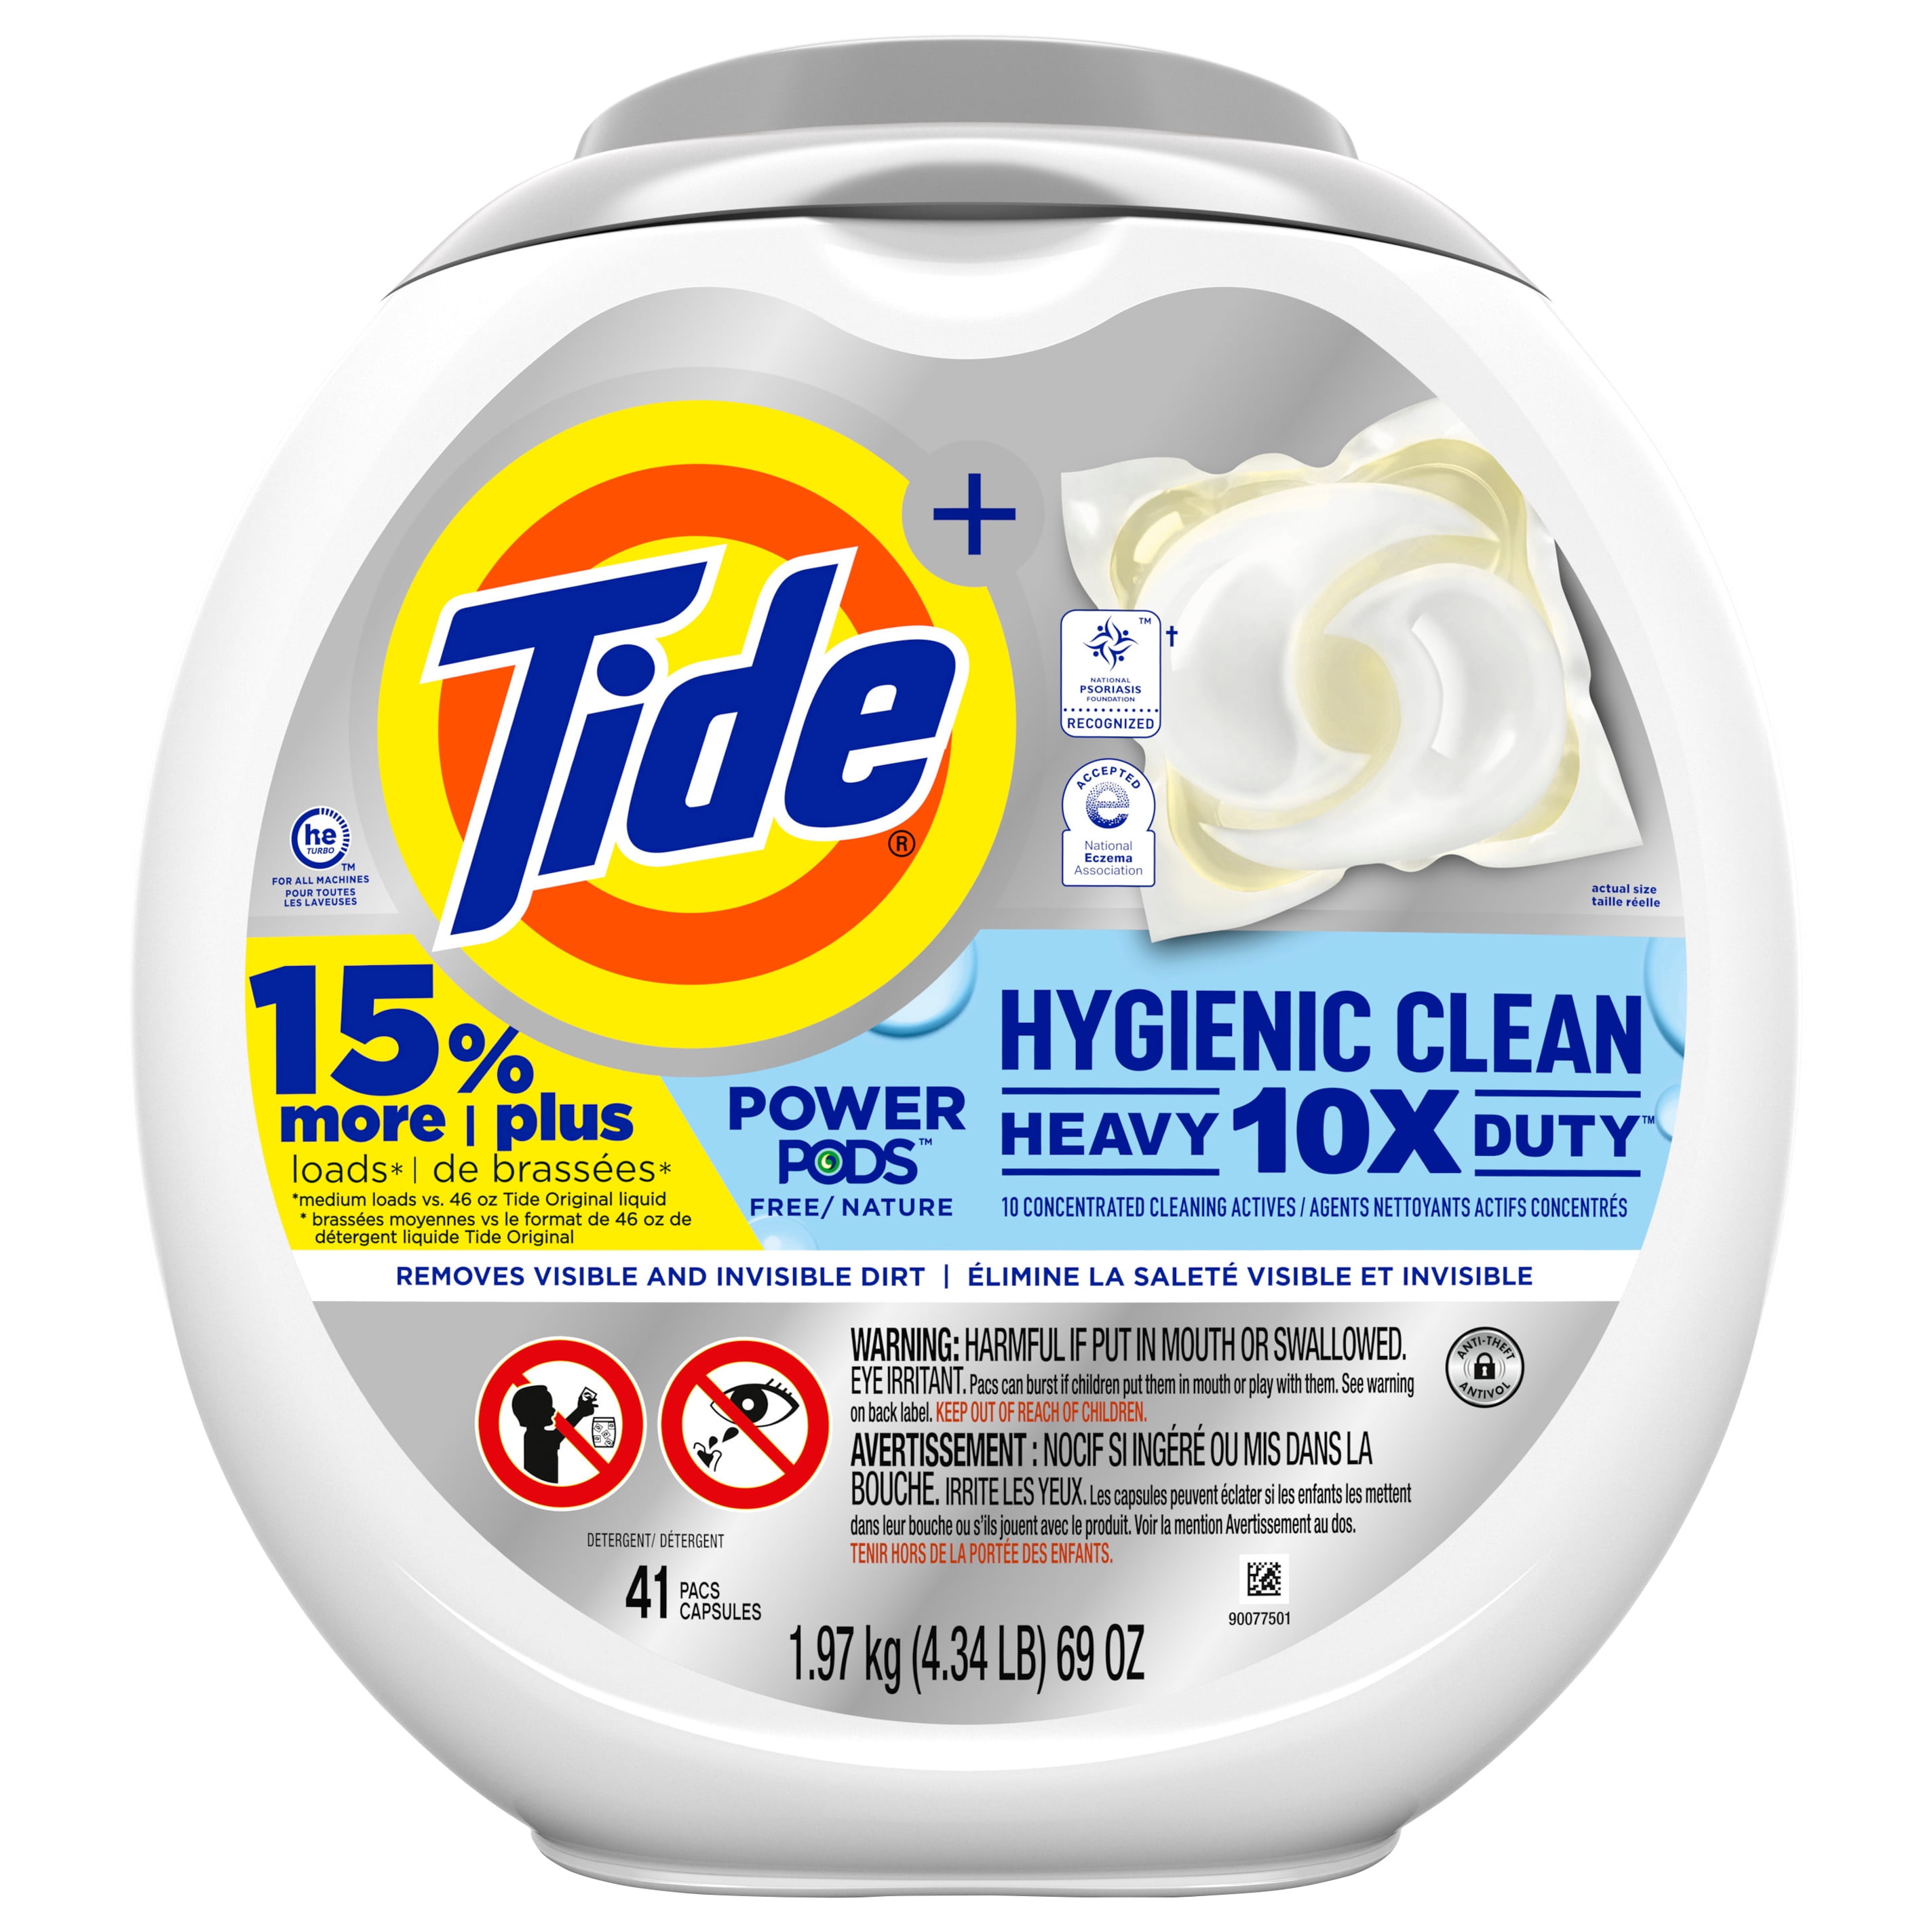 Tide Hygienic Clean Heavy Duty 10x Free Power Pods Liquid Laundry Detergent, White, Unscented, 41 Count - 1